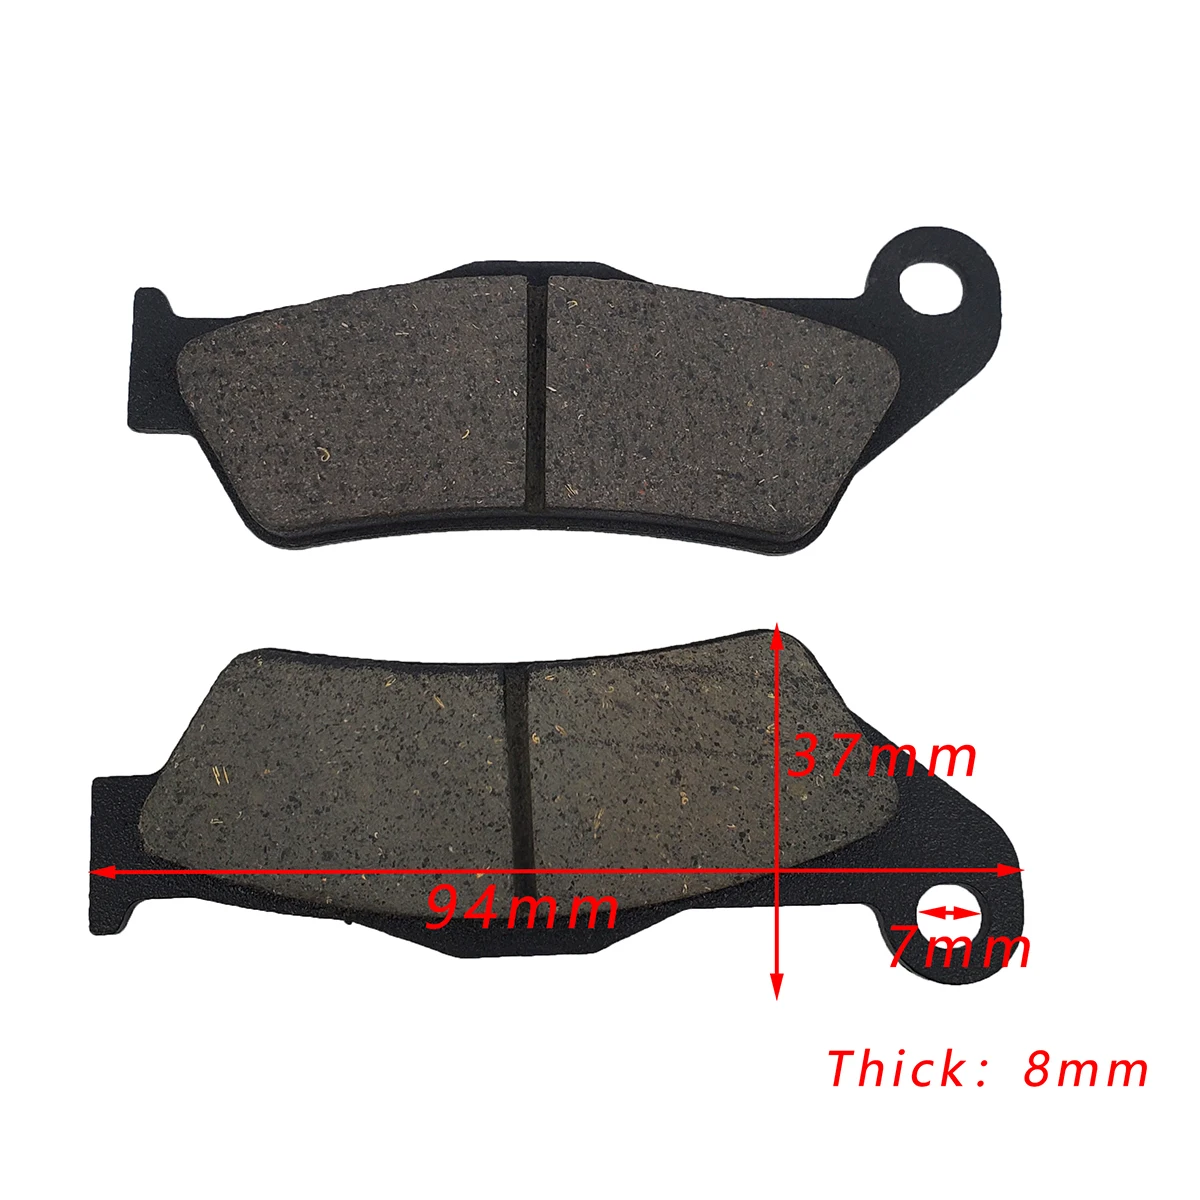 Motorcycle Front & Rear Brake Pads for KTM SX XC XCW SXF EXC 250 300 TPI 2020 125 150 200 350 450 EXCF XCRW 400 500 525 530 625